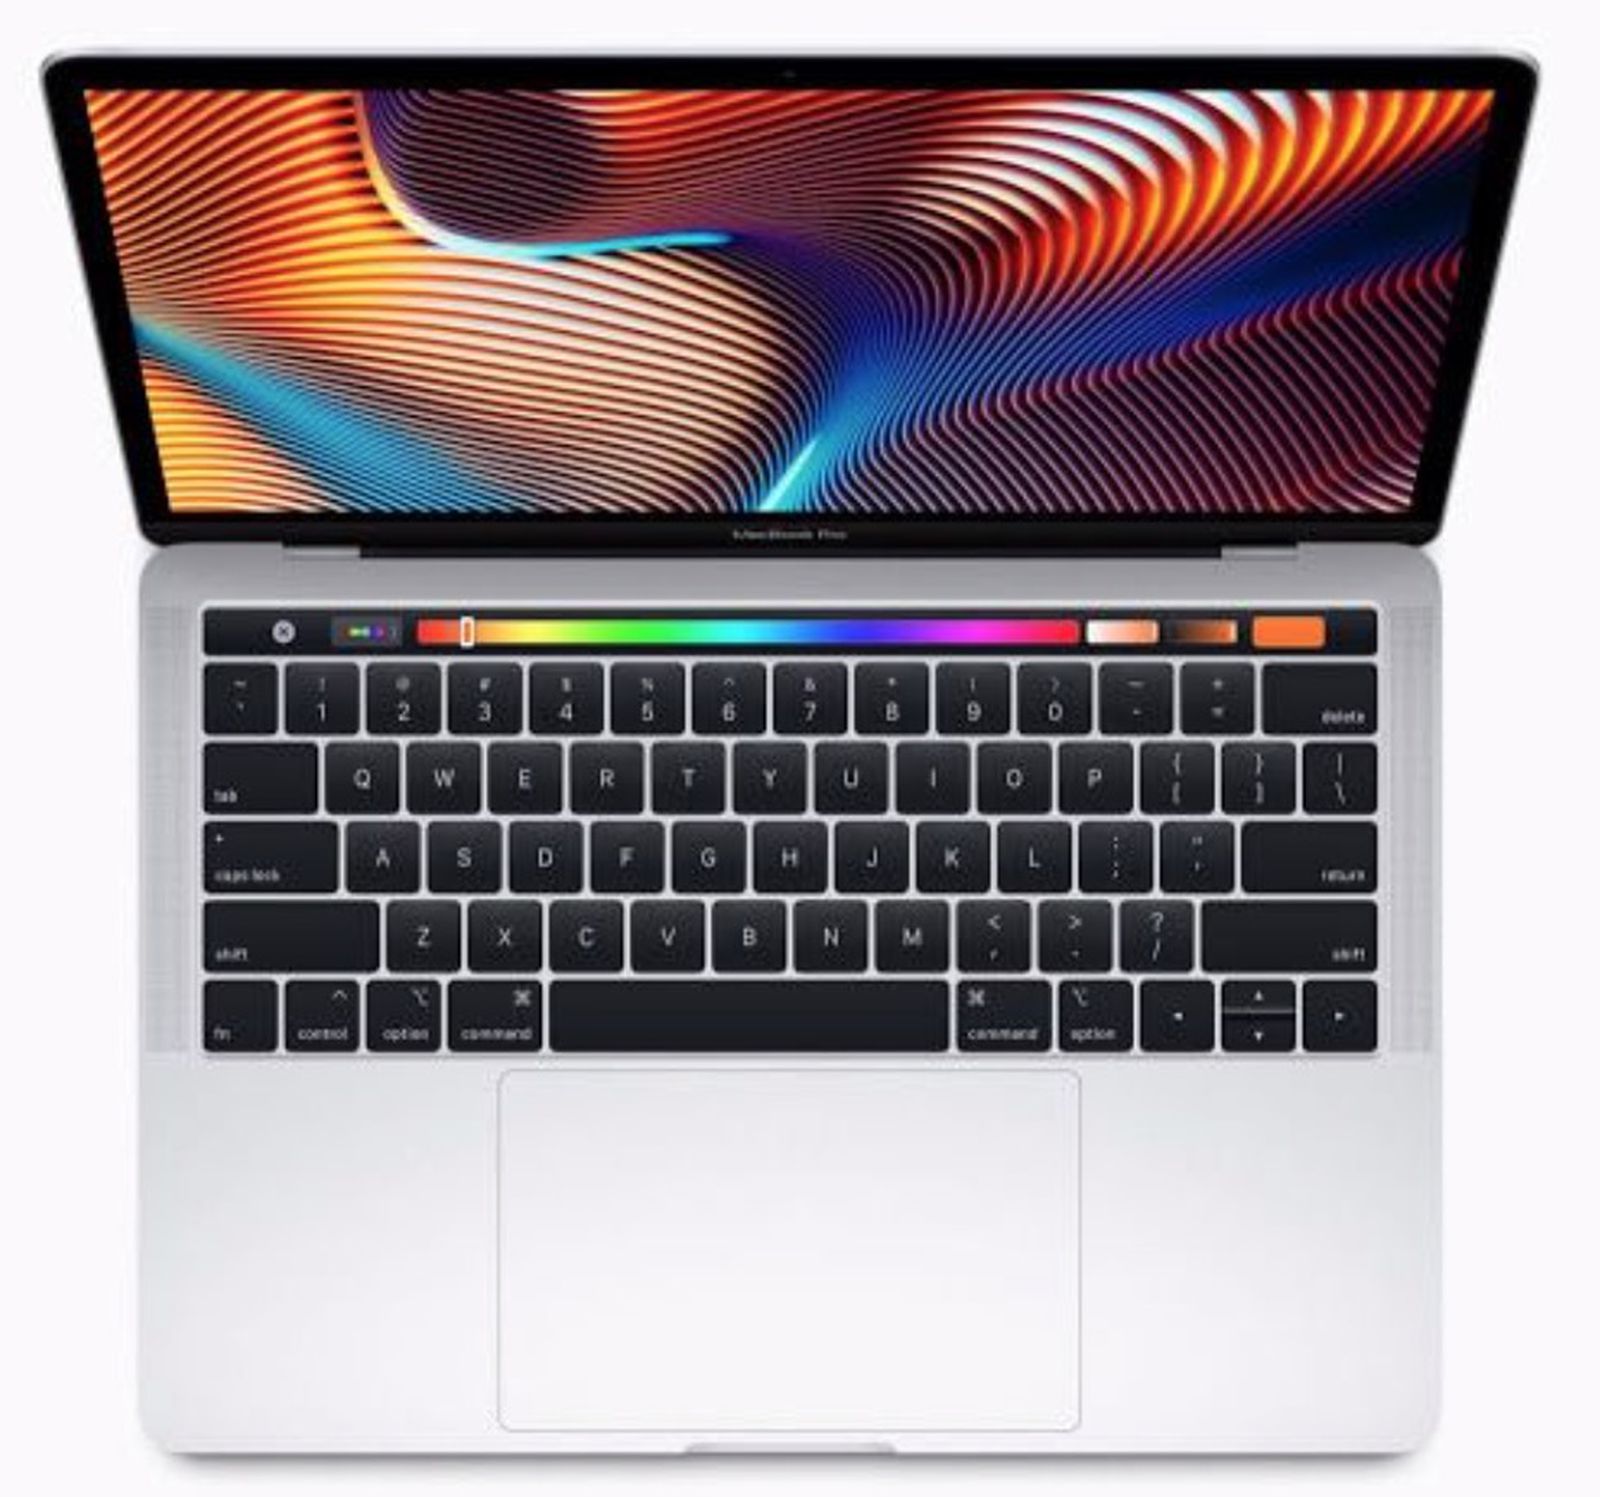 Leaker Claims New 13 Inch Macbook Pro Coming As Soon As Next Month